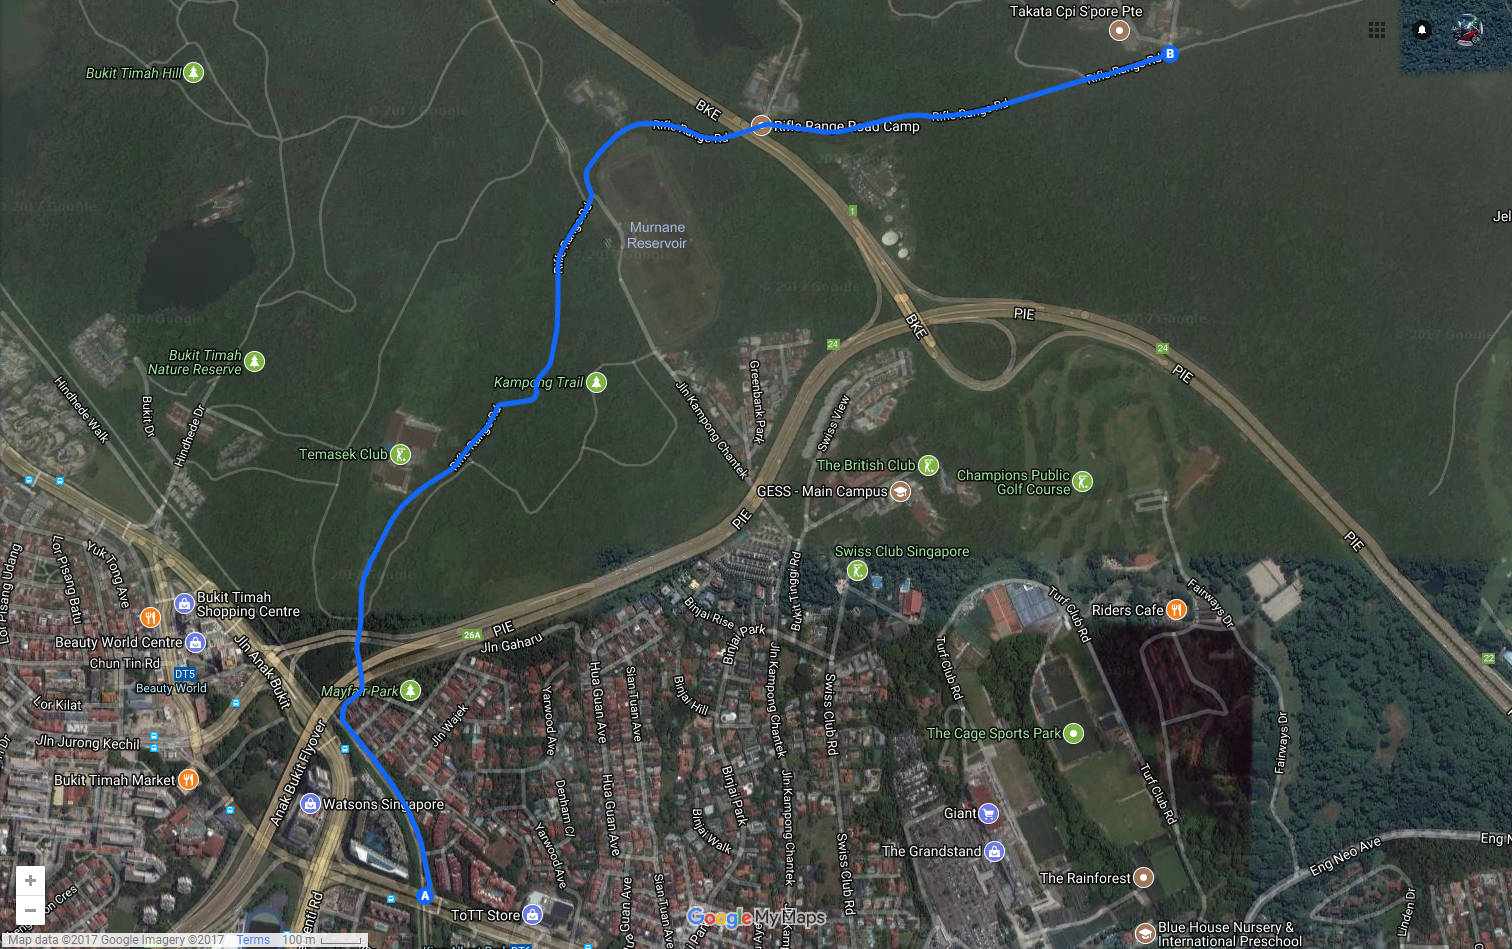 5 Ulu Initial D-Worthy Roads In Singapore Every Newbie And Laojiao Driver Should Conquer (3) - Rifle Range Road map